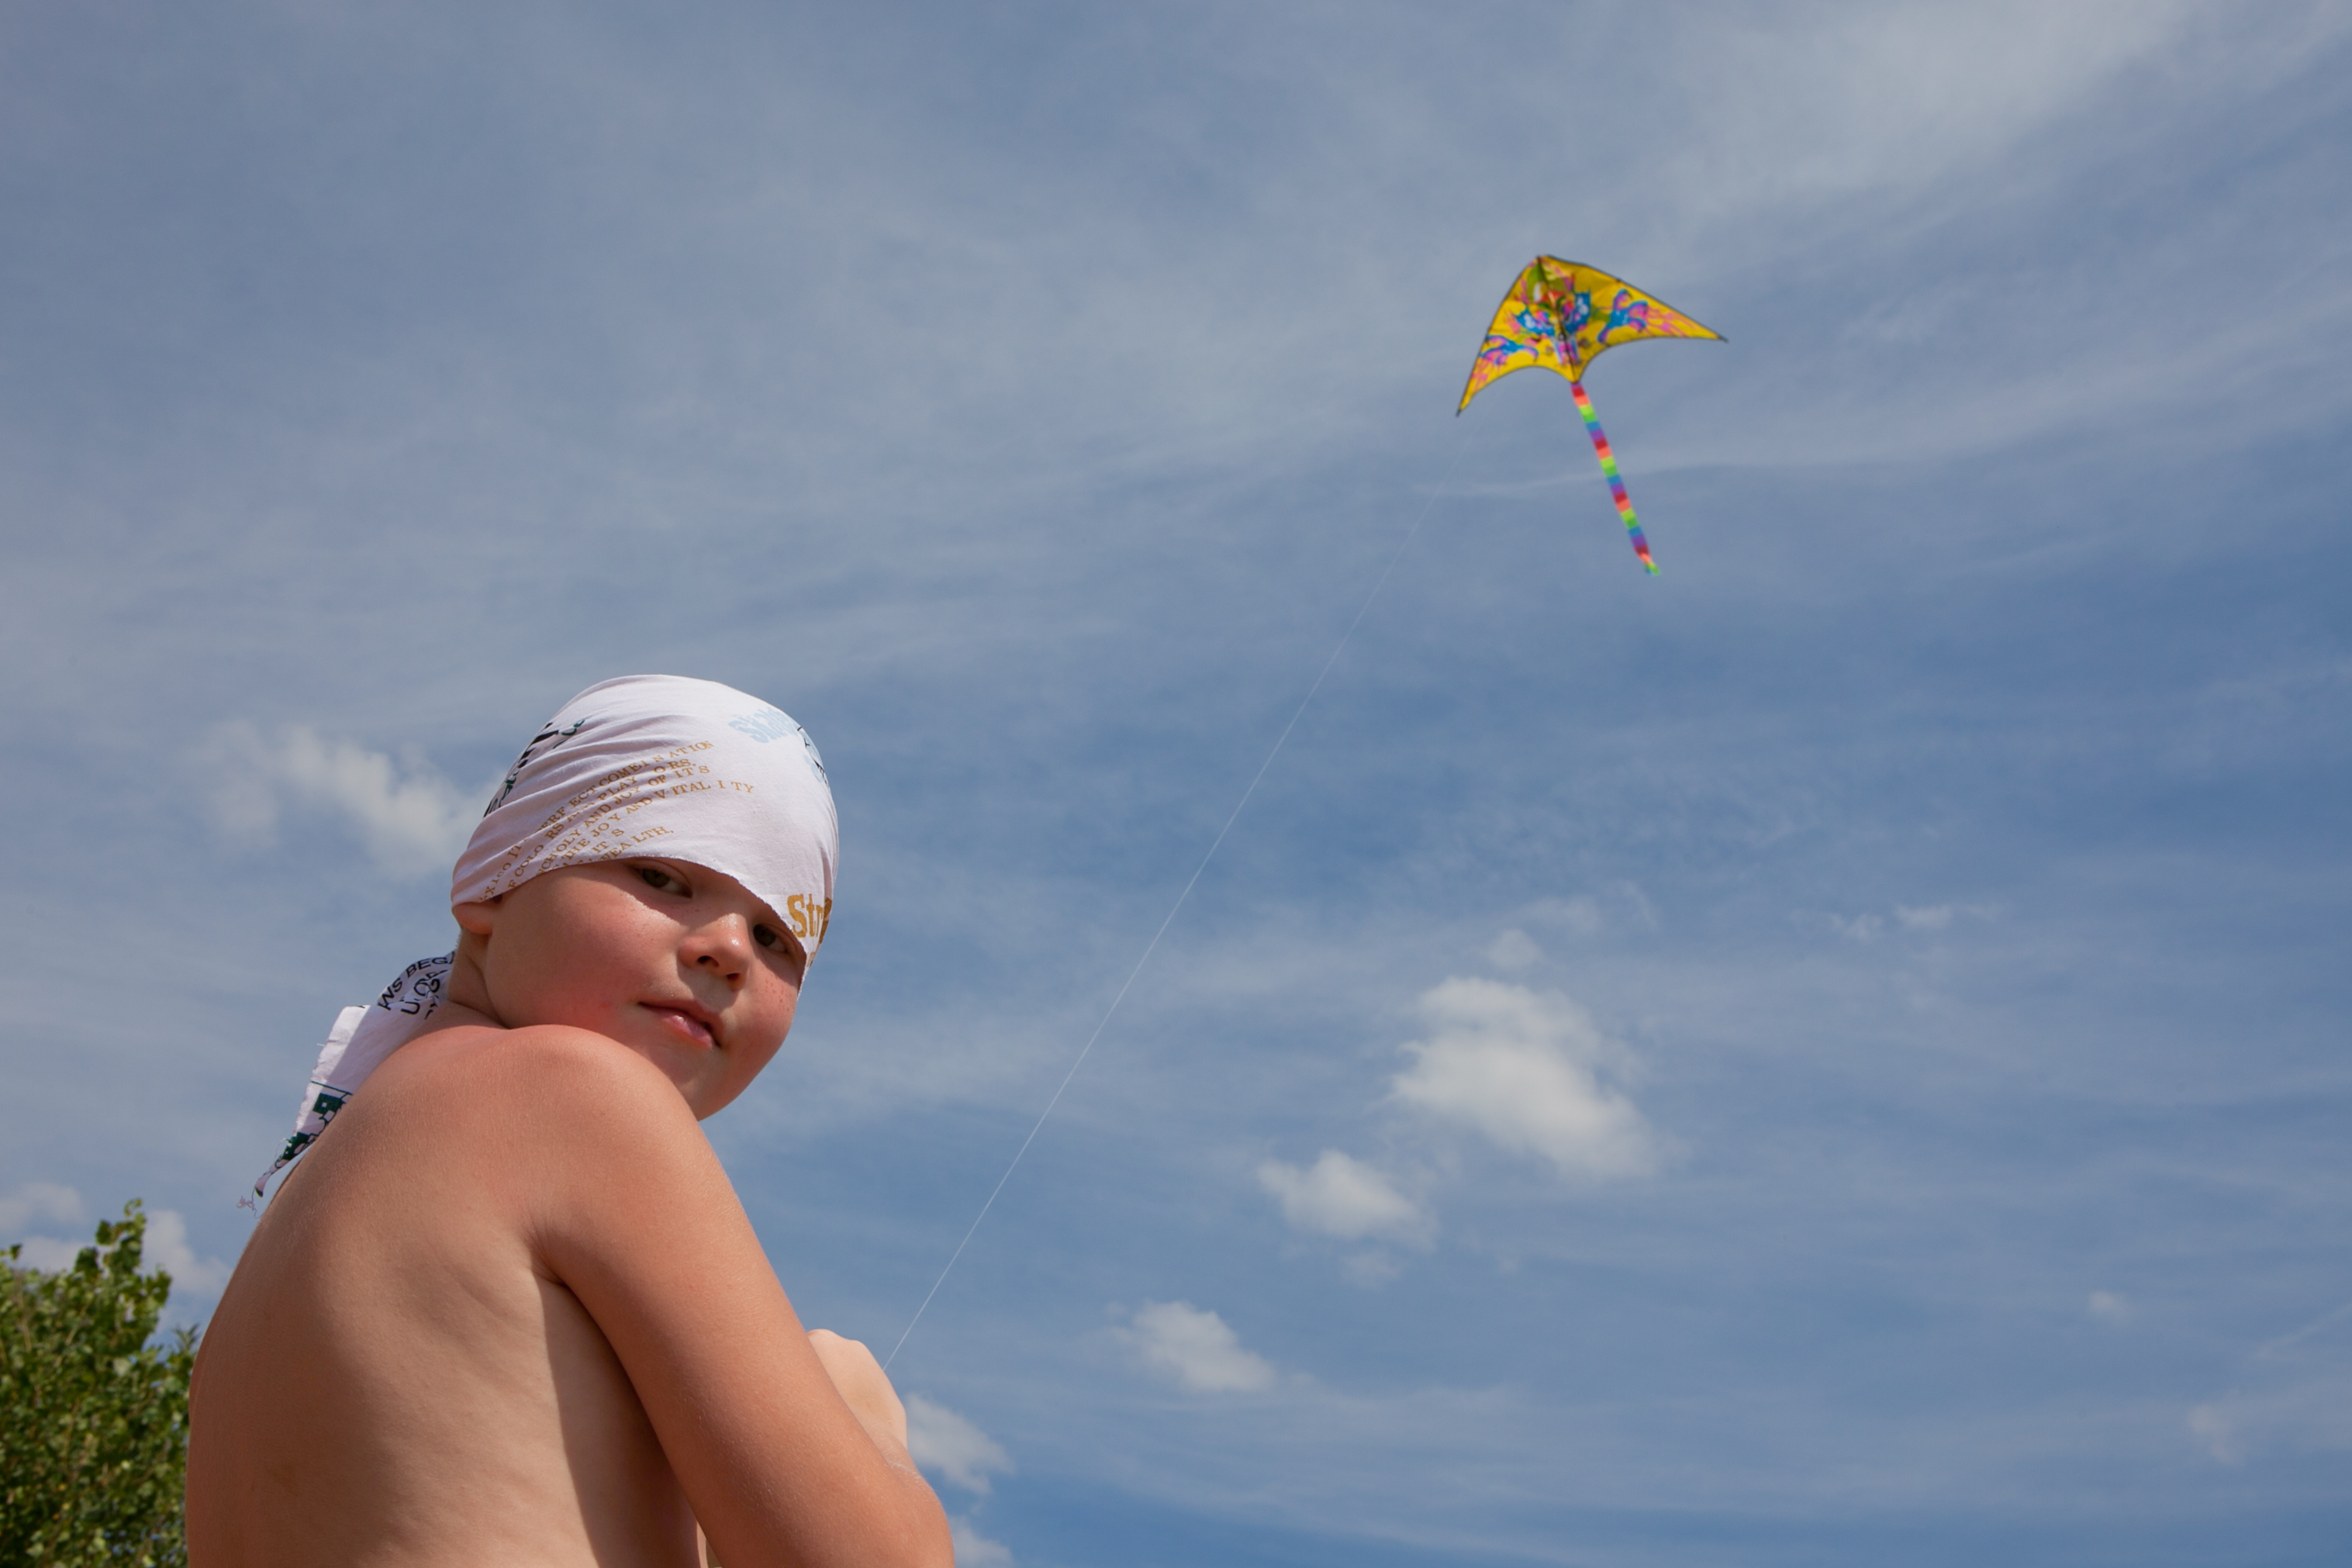 Boy plays kite, Air, Recreation, Vacation, Toy, HQ Photo